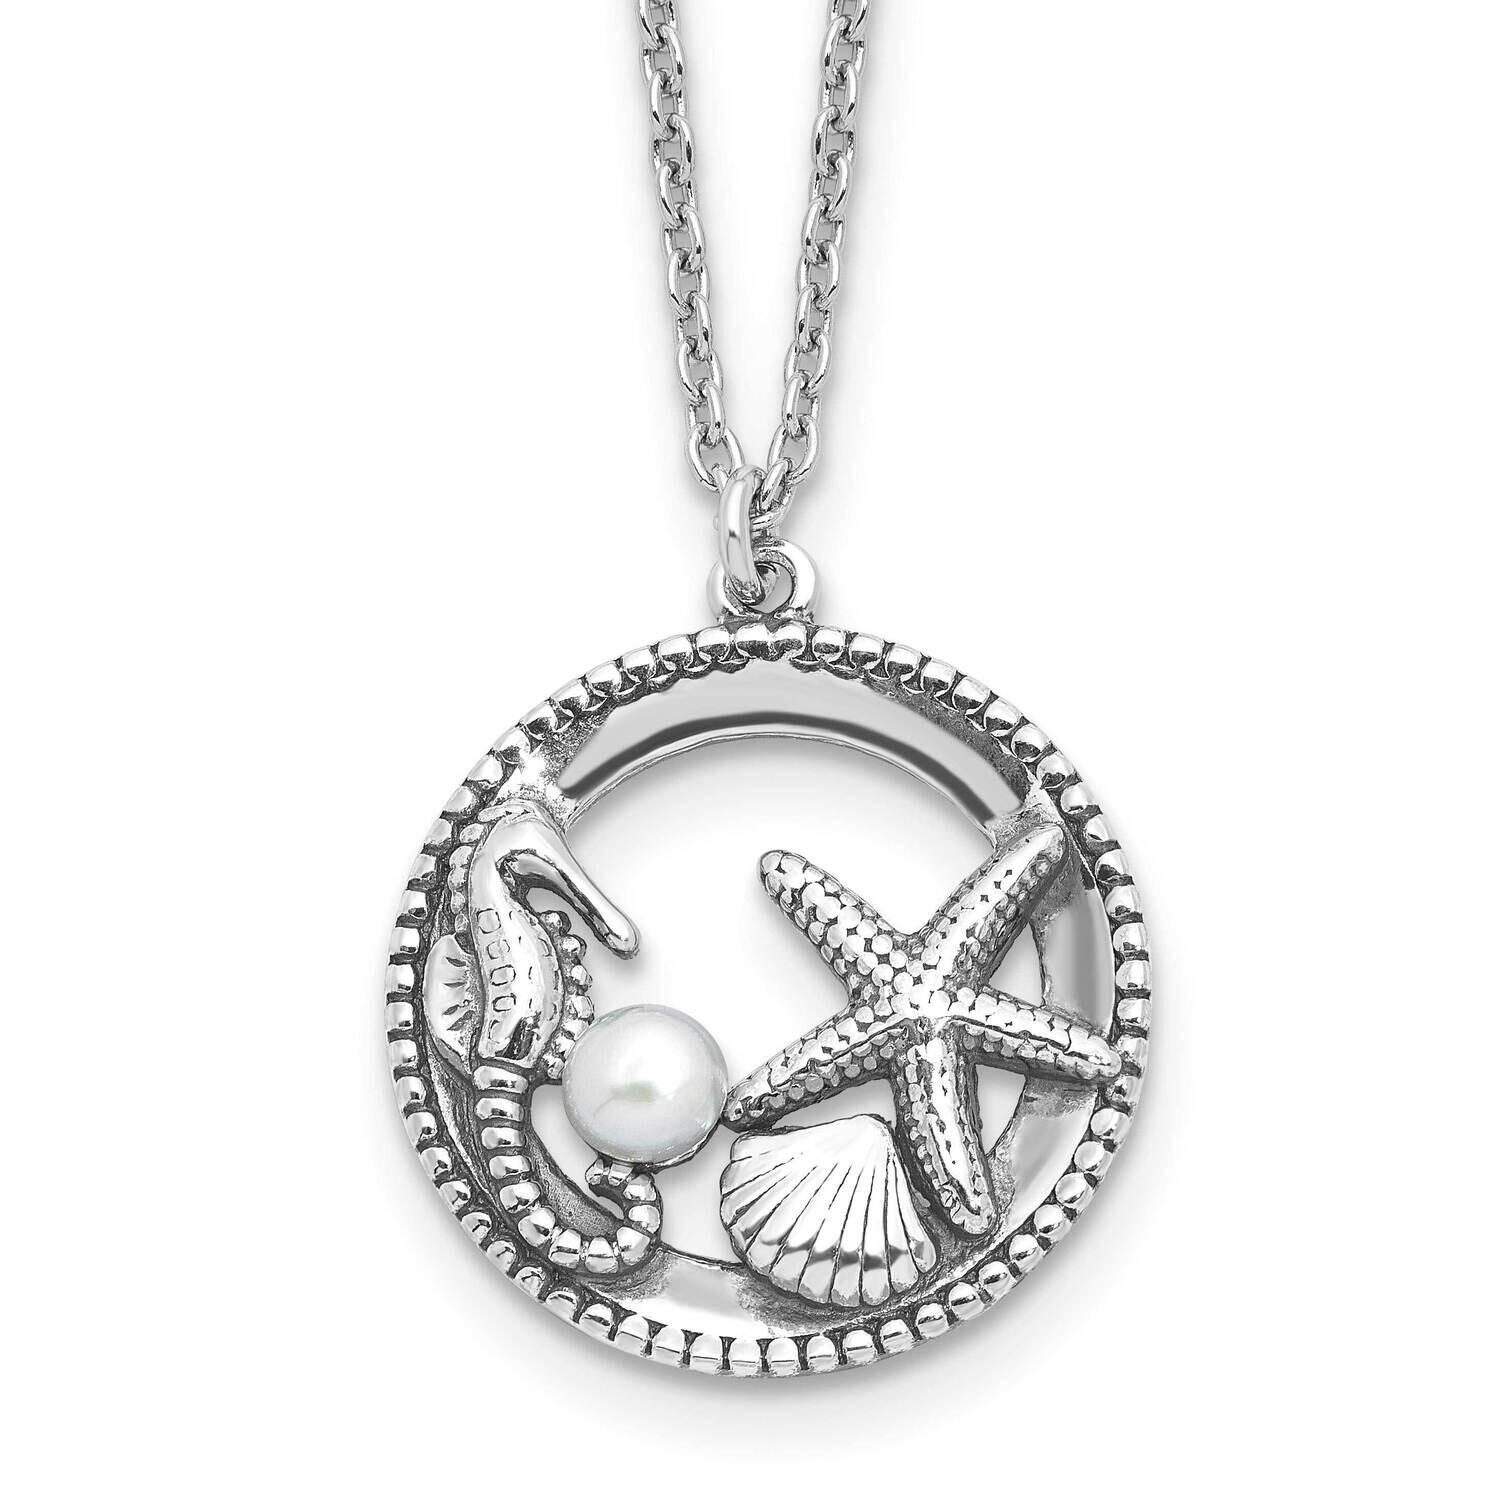 Rh-Plated Oxidized Mop Sea Life 2 Inch Extension Necklace Sterling Silver QG6685-16